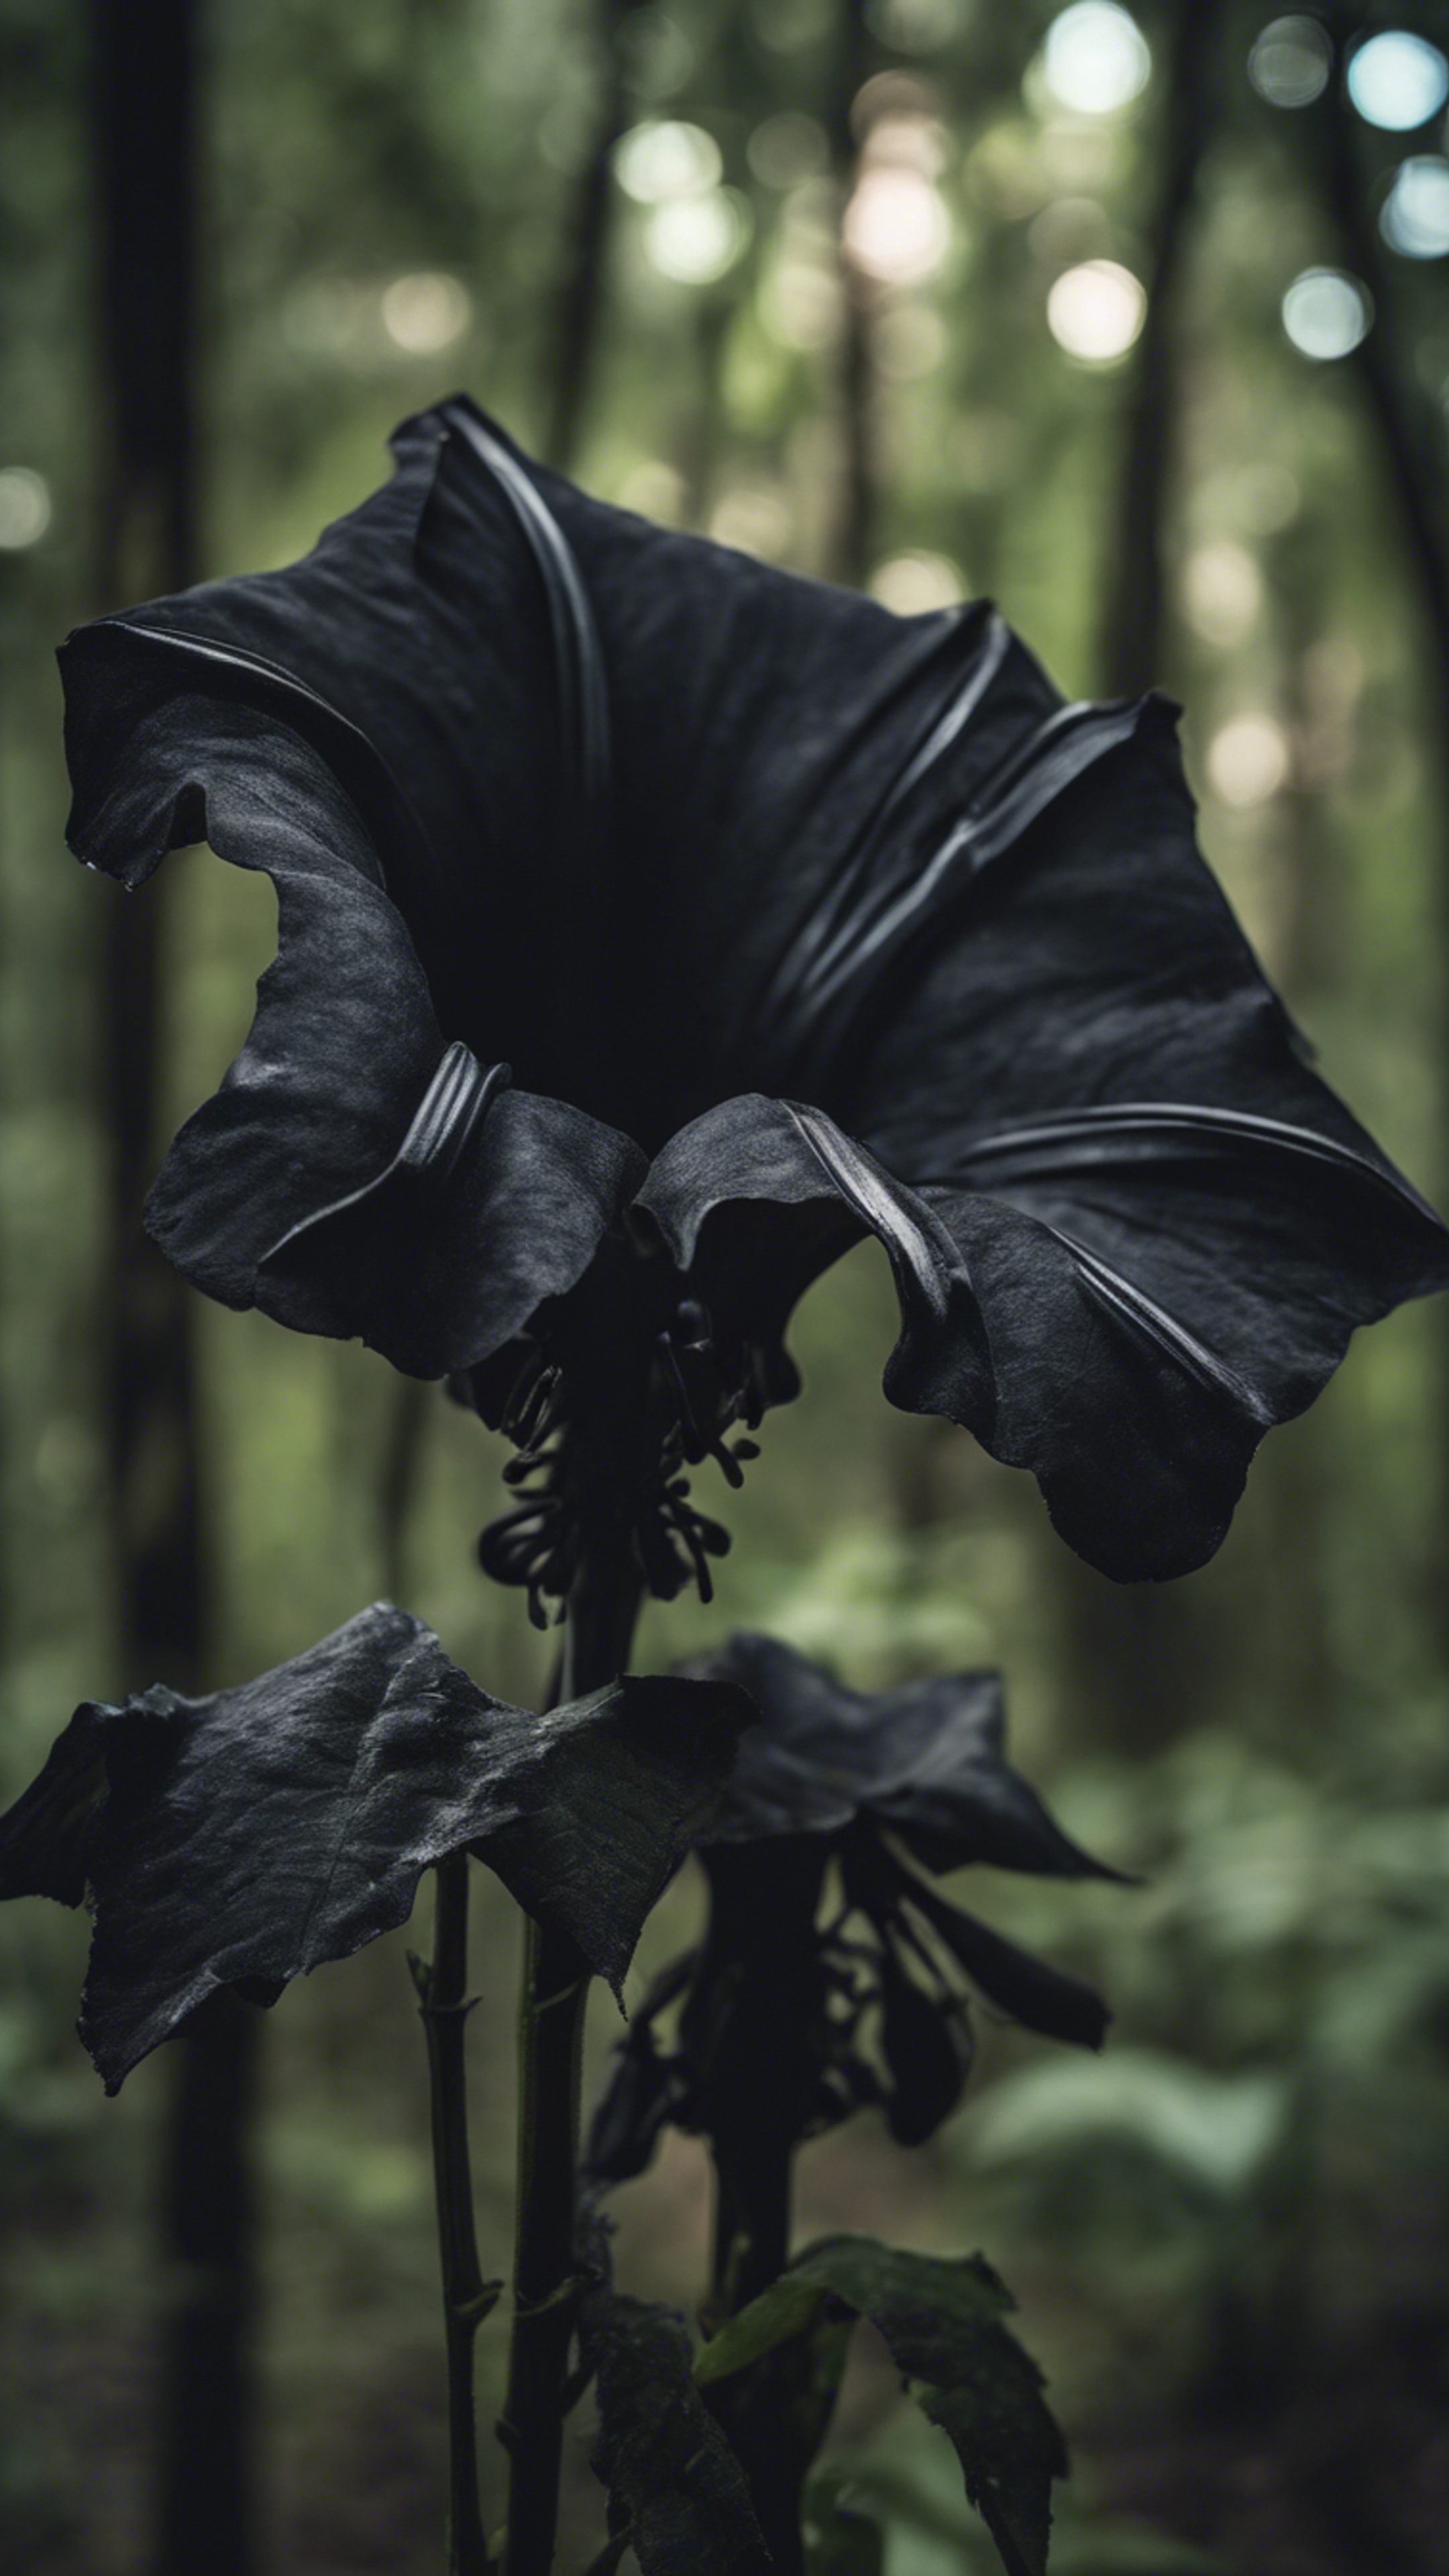 A black trumpet flower evoking an eerie yet captivating atmosphere in the heart of a dense forest. Tapet[87d98efd7999478c8568]